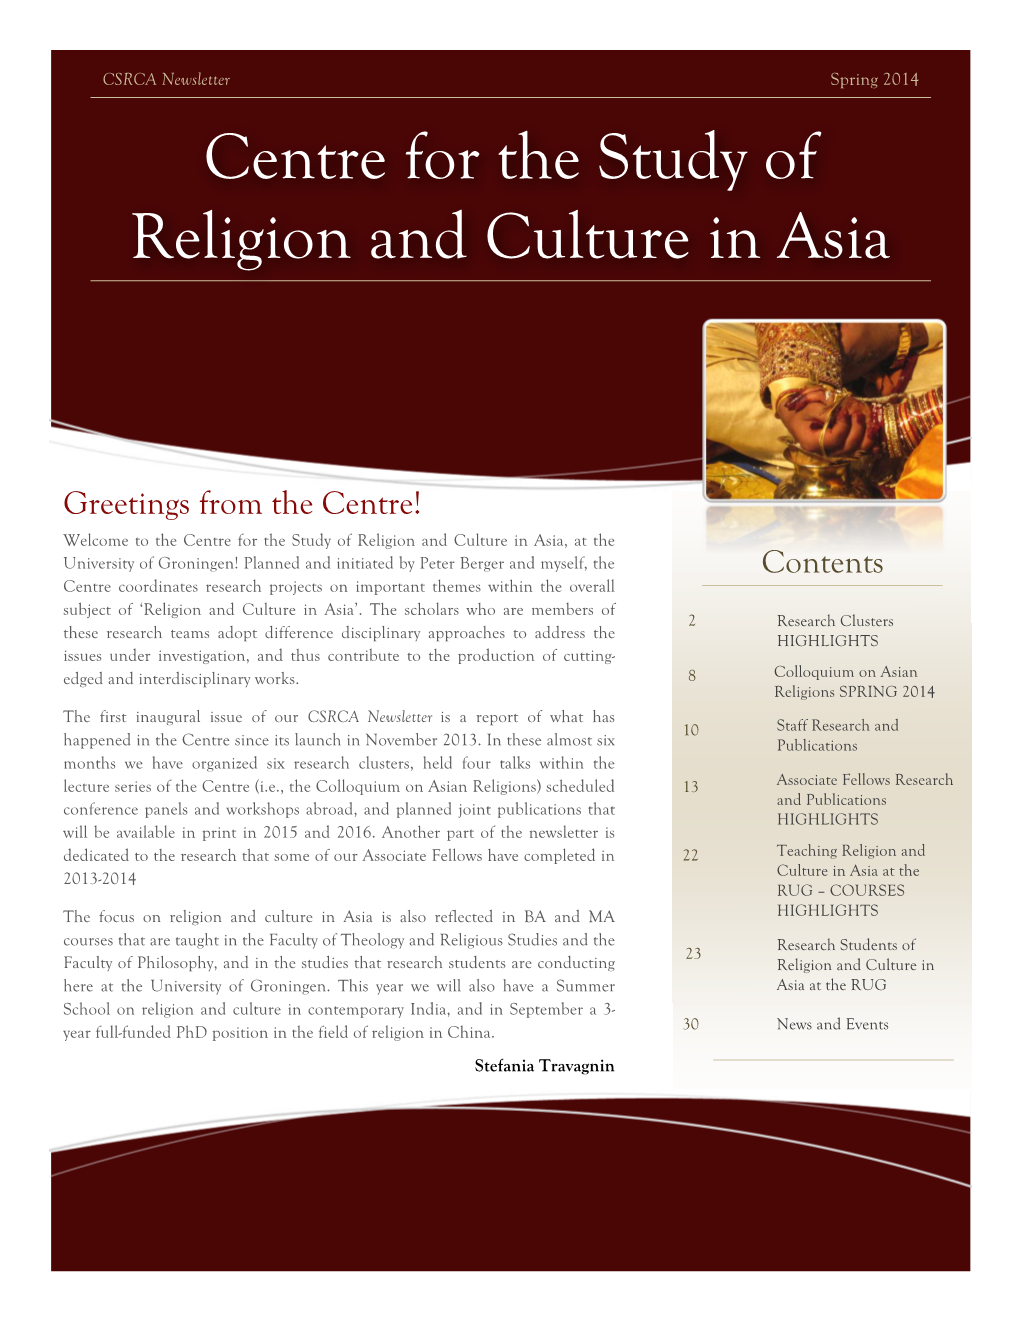 Centre for the Study of Religion and Culture in Asia